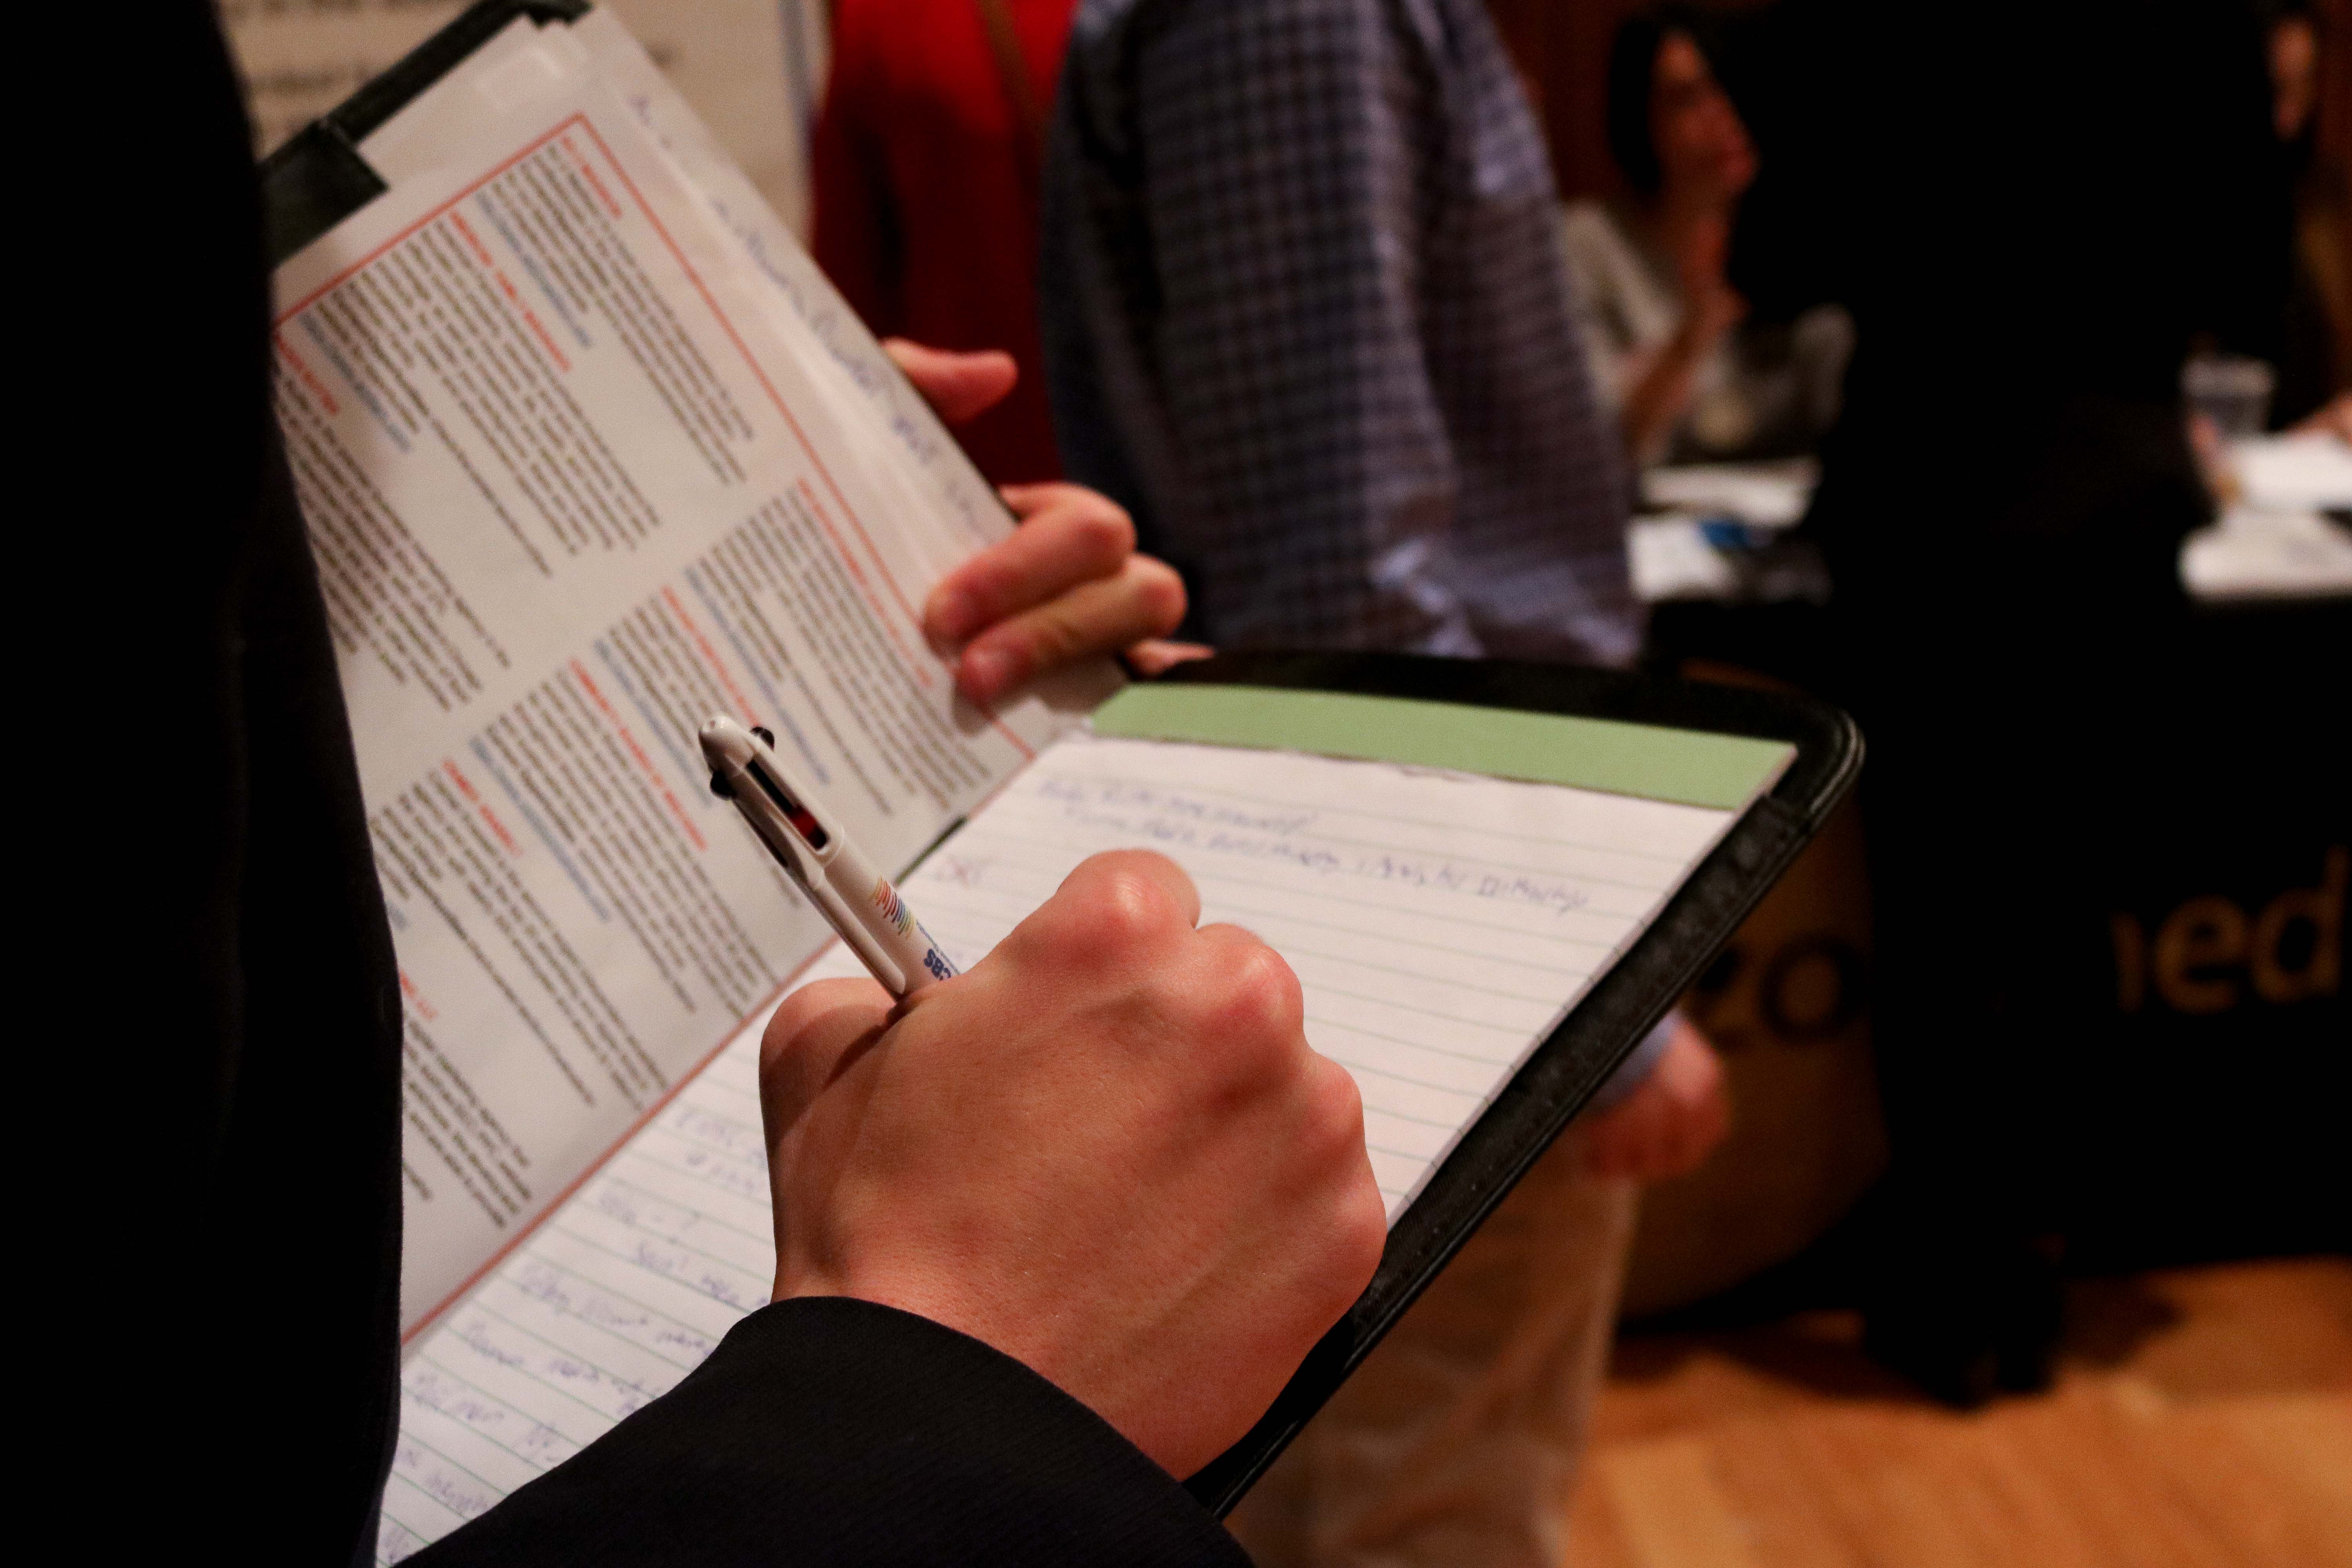 A student taking notes at a career fair